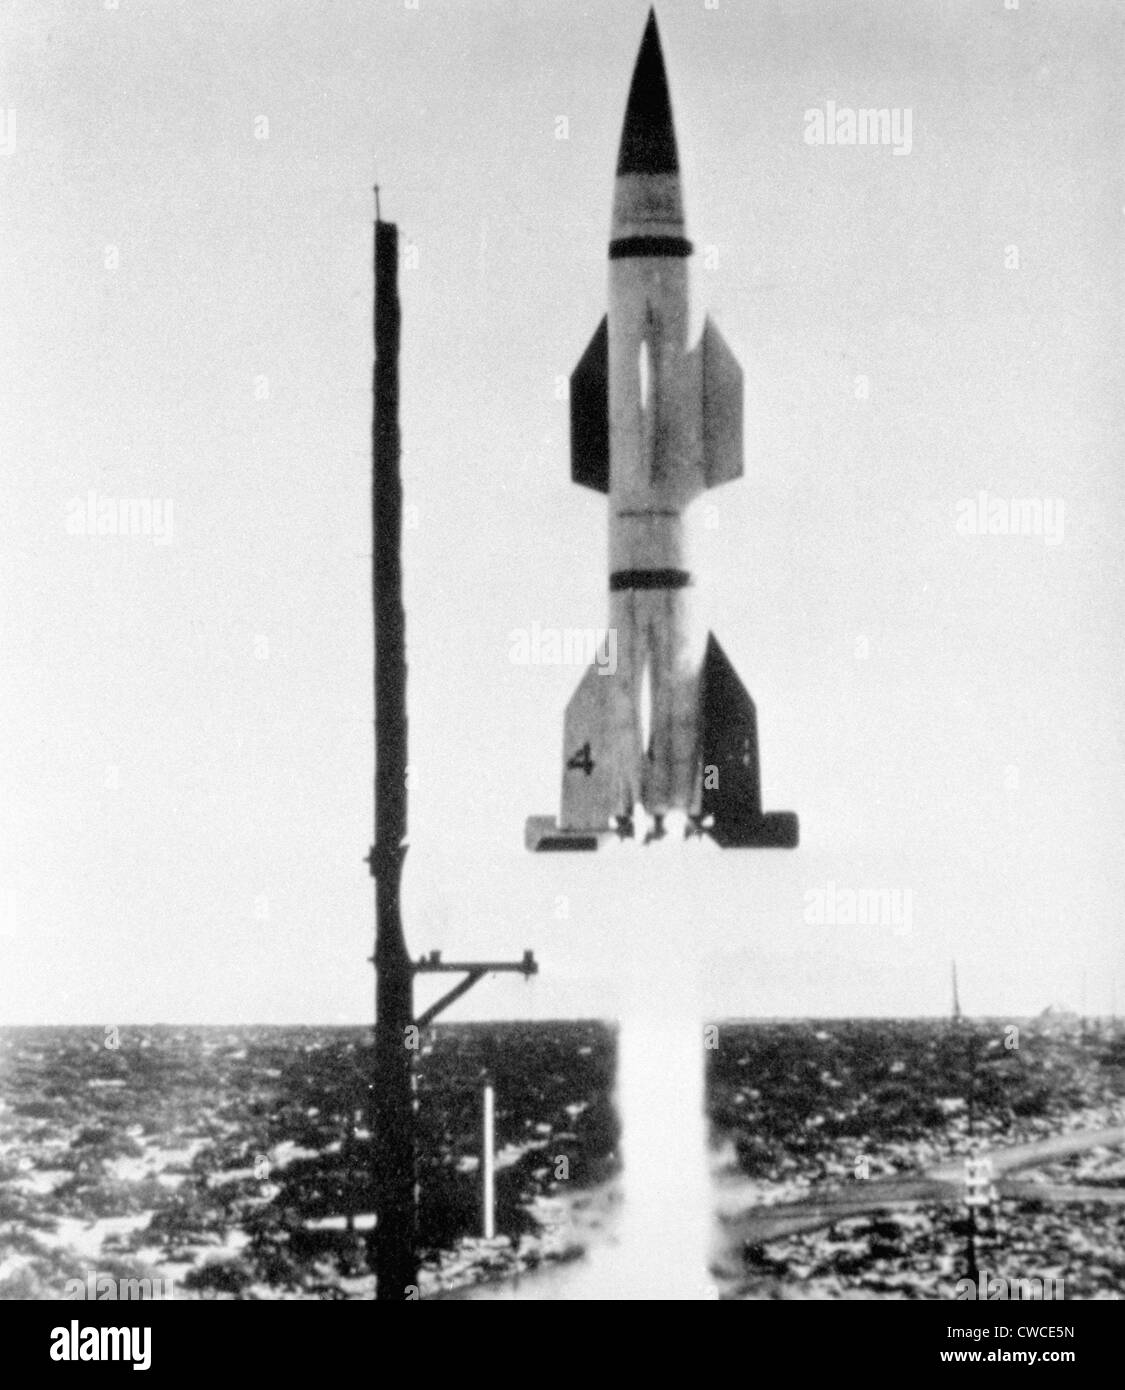 Launch of the first Hermes A-1 rocket at White Sand Proving Ground. It combined the Herman V-2 exterior shape with entirely new Stock Photo